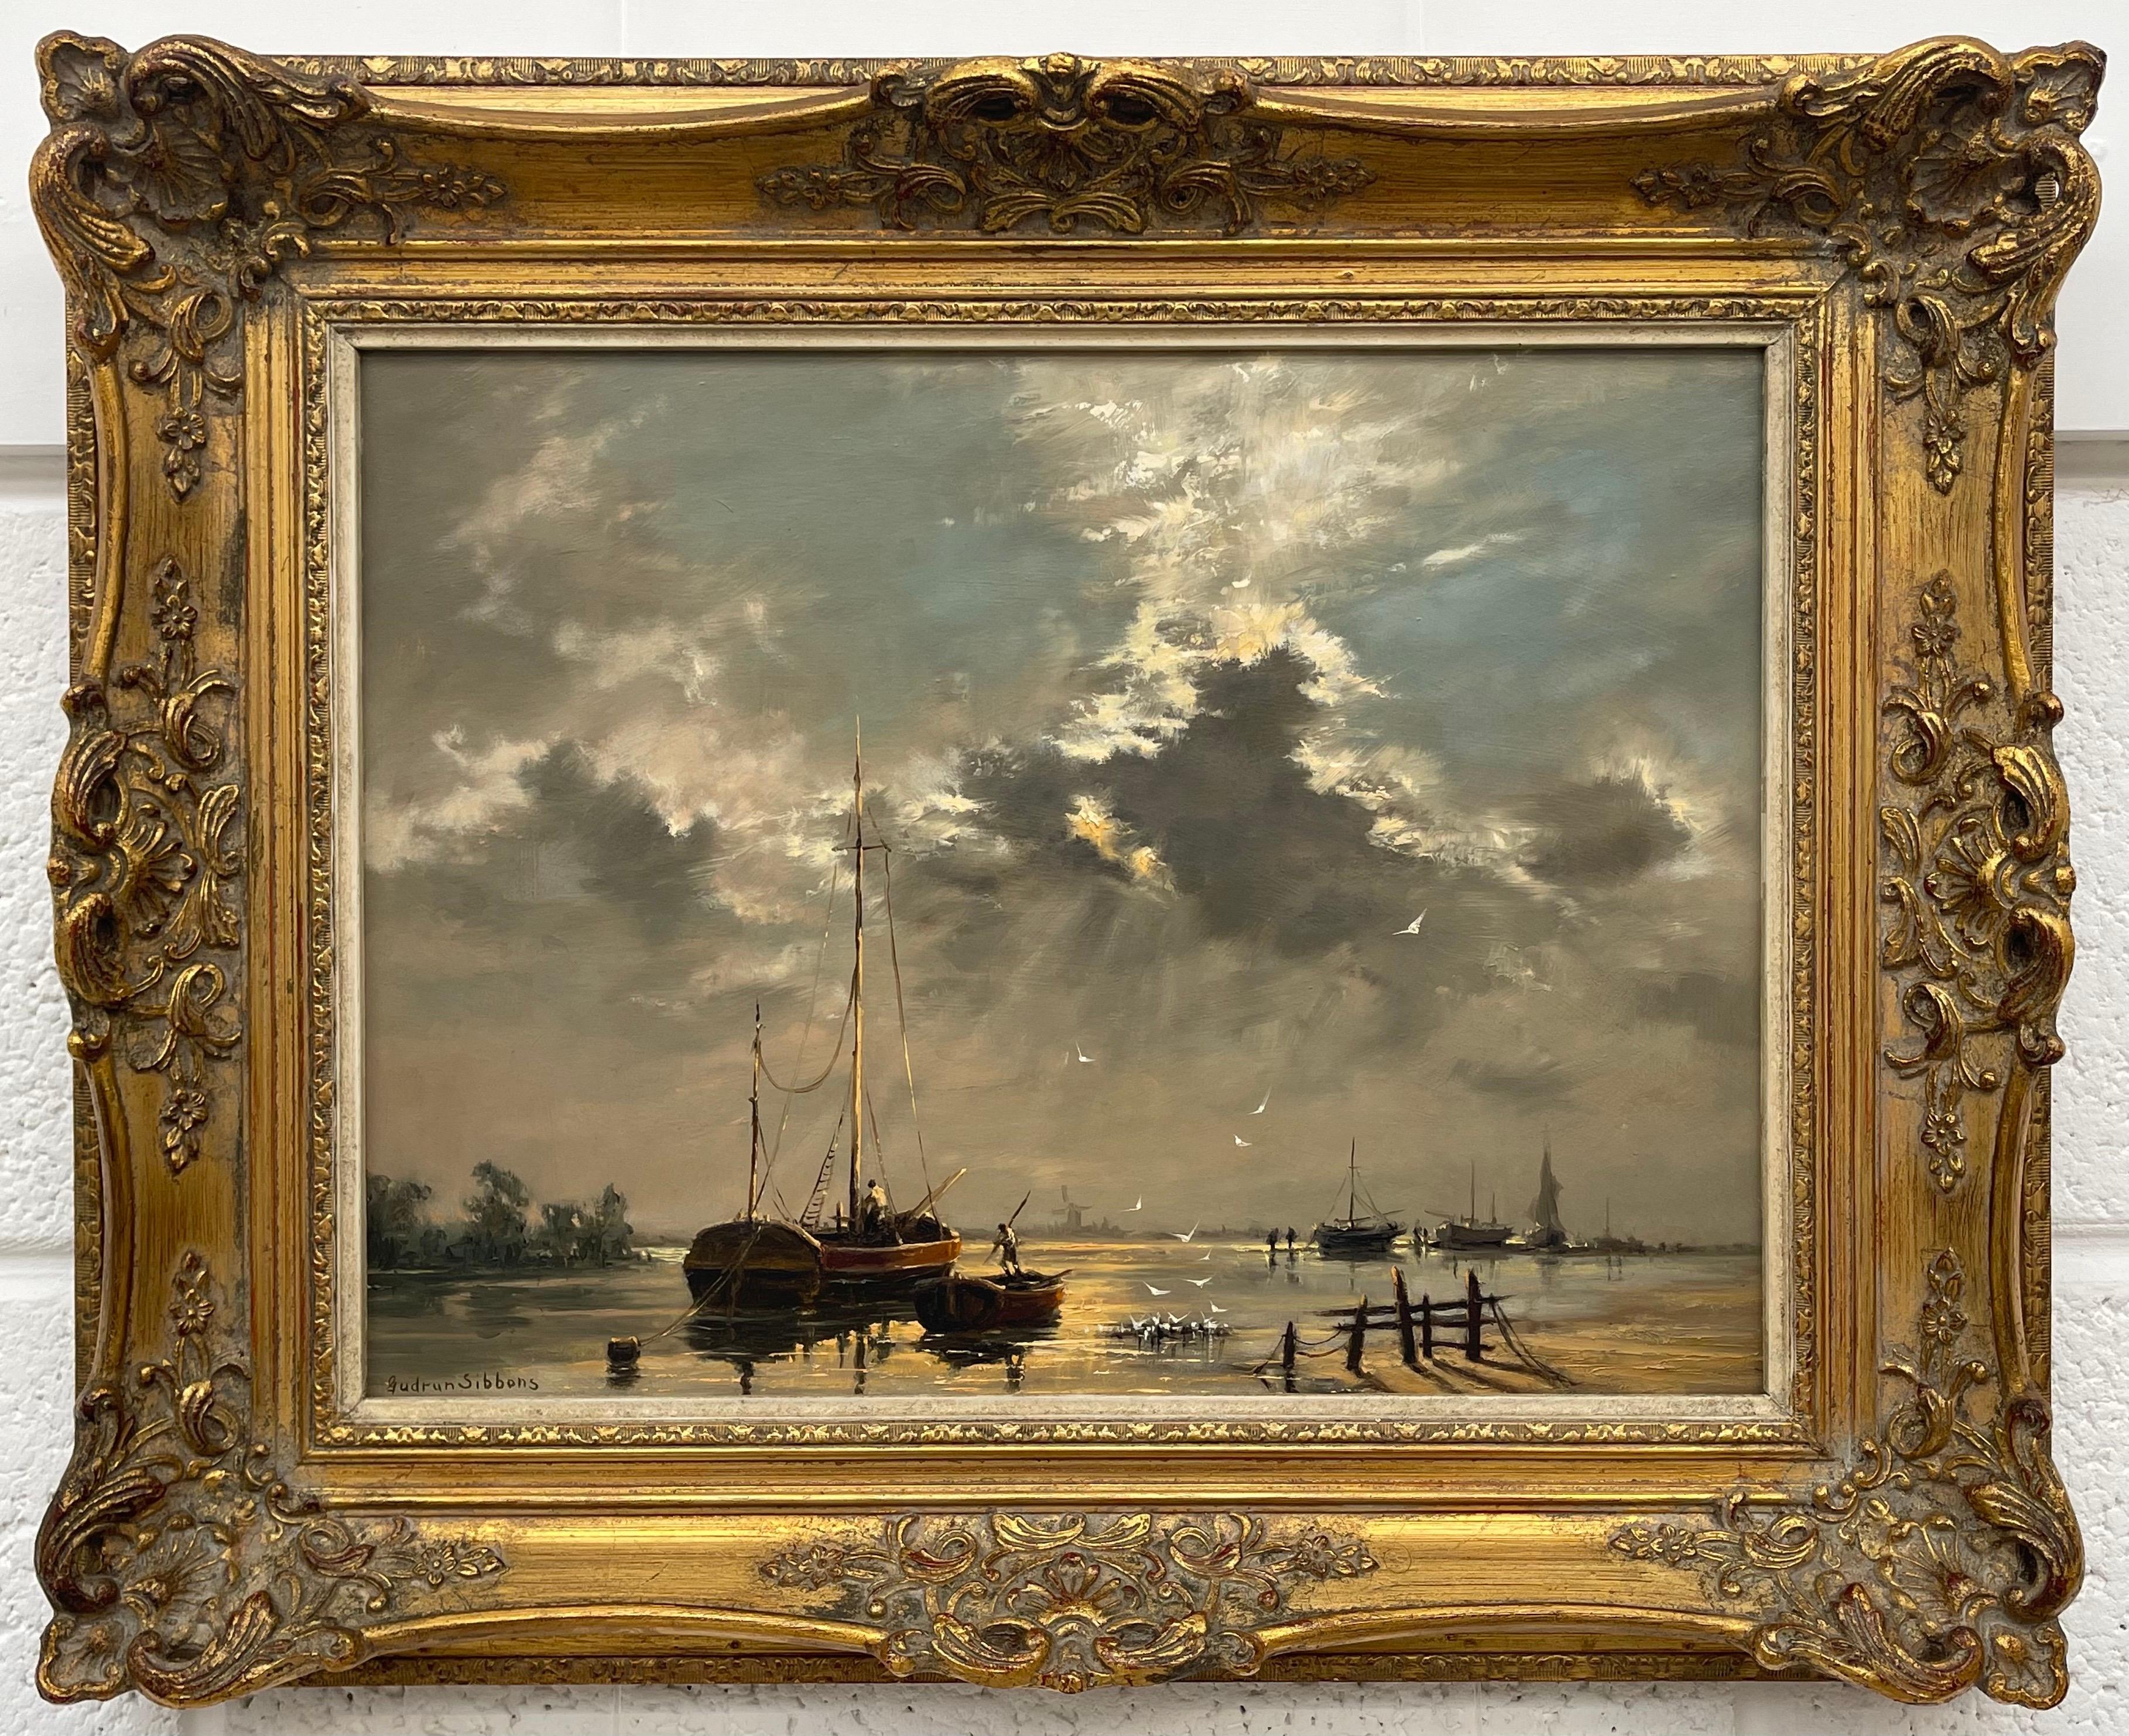 Gudrun Sibbons (1925- ) German-born British Artist. 

Original Oil Painting of a Sunny Evening Scene with Moored Boats in an Estuary. 
Oil on Board, Signed. Framed in a period ornate moulding.

Art measures 16 x 12 inches
Frame measures 22 x 18